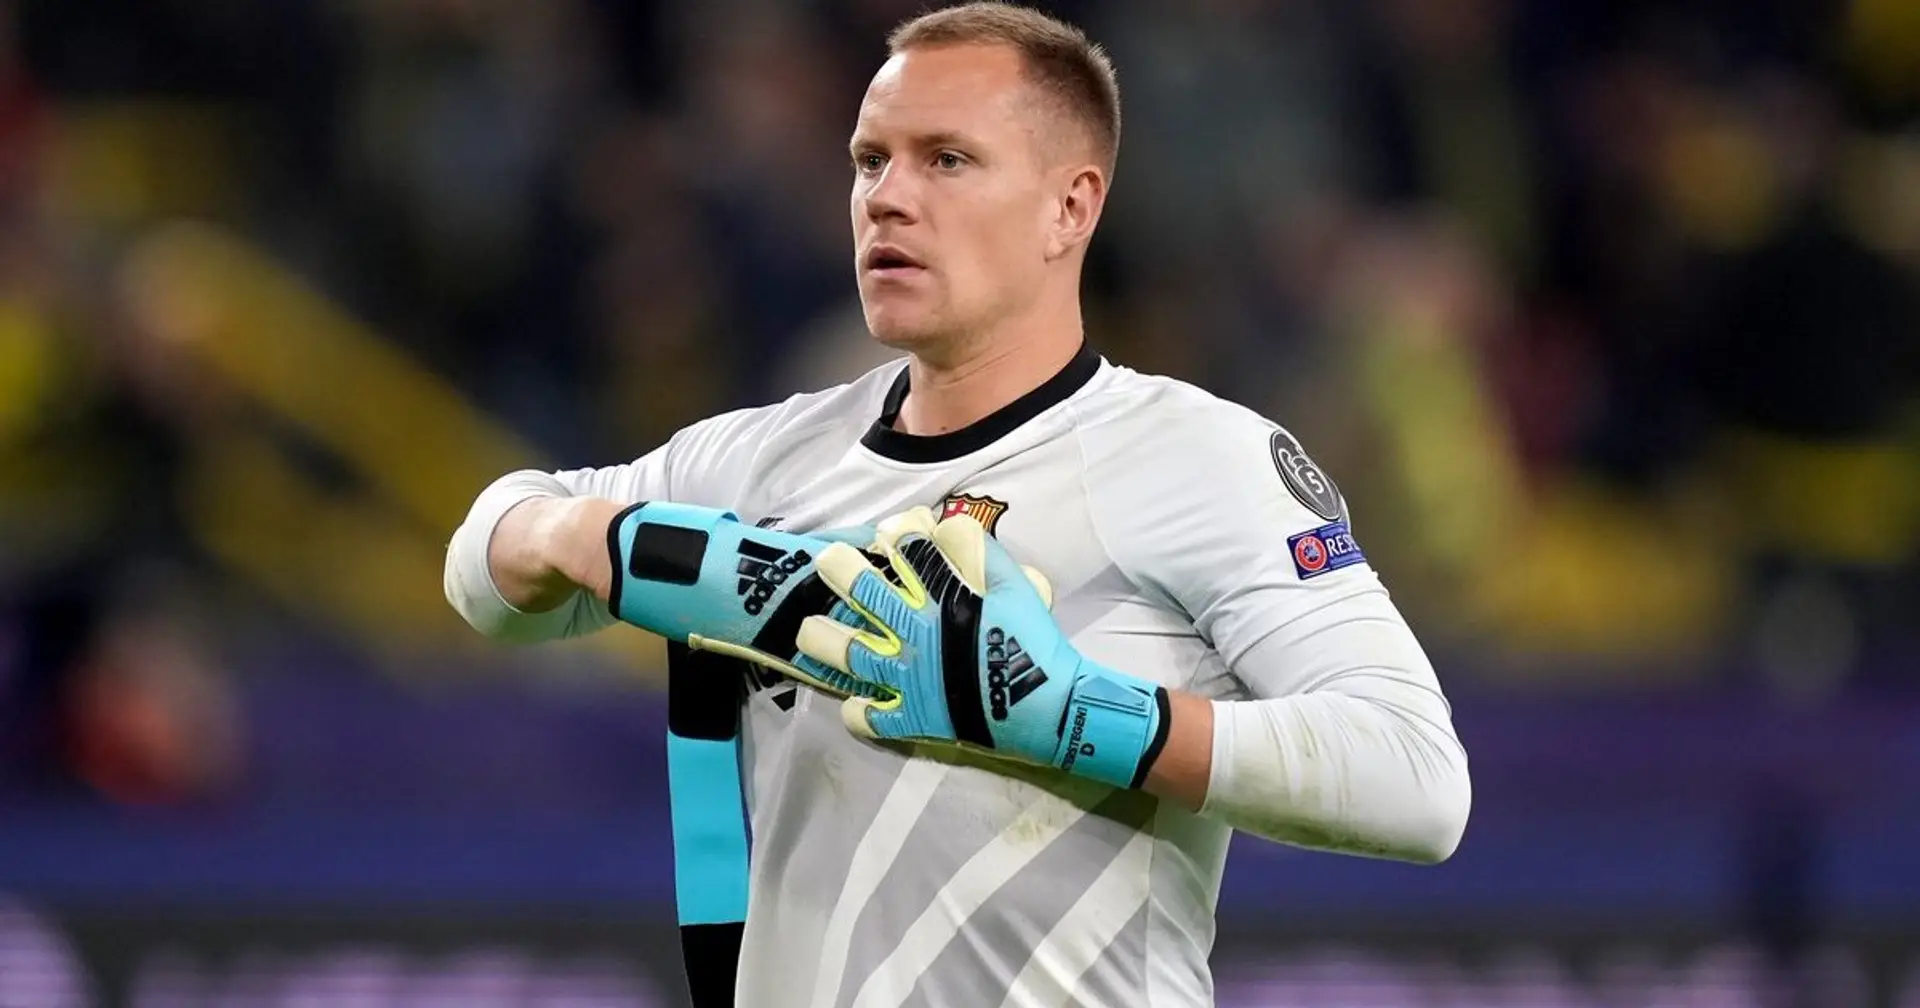 Inter reportedly join Chelsea in race to land Ter Stegen next summer